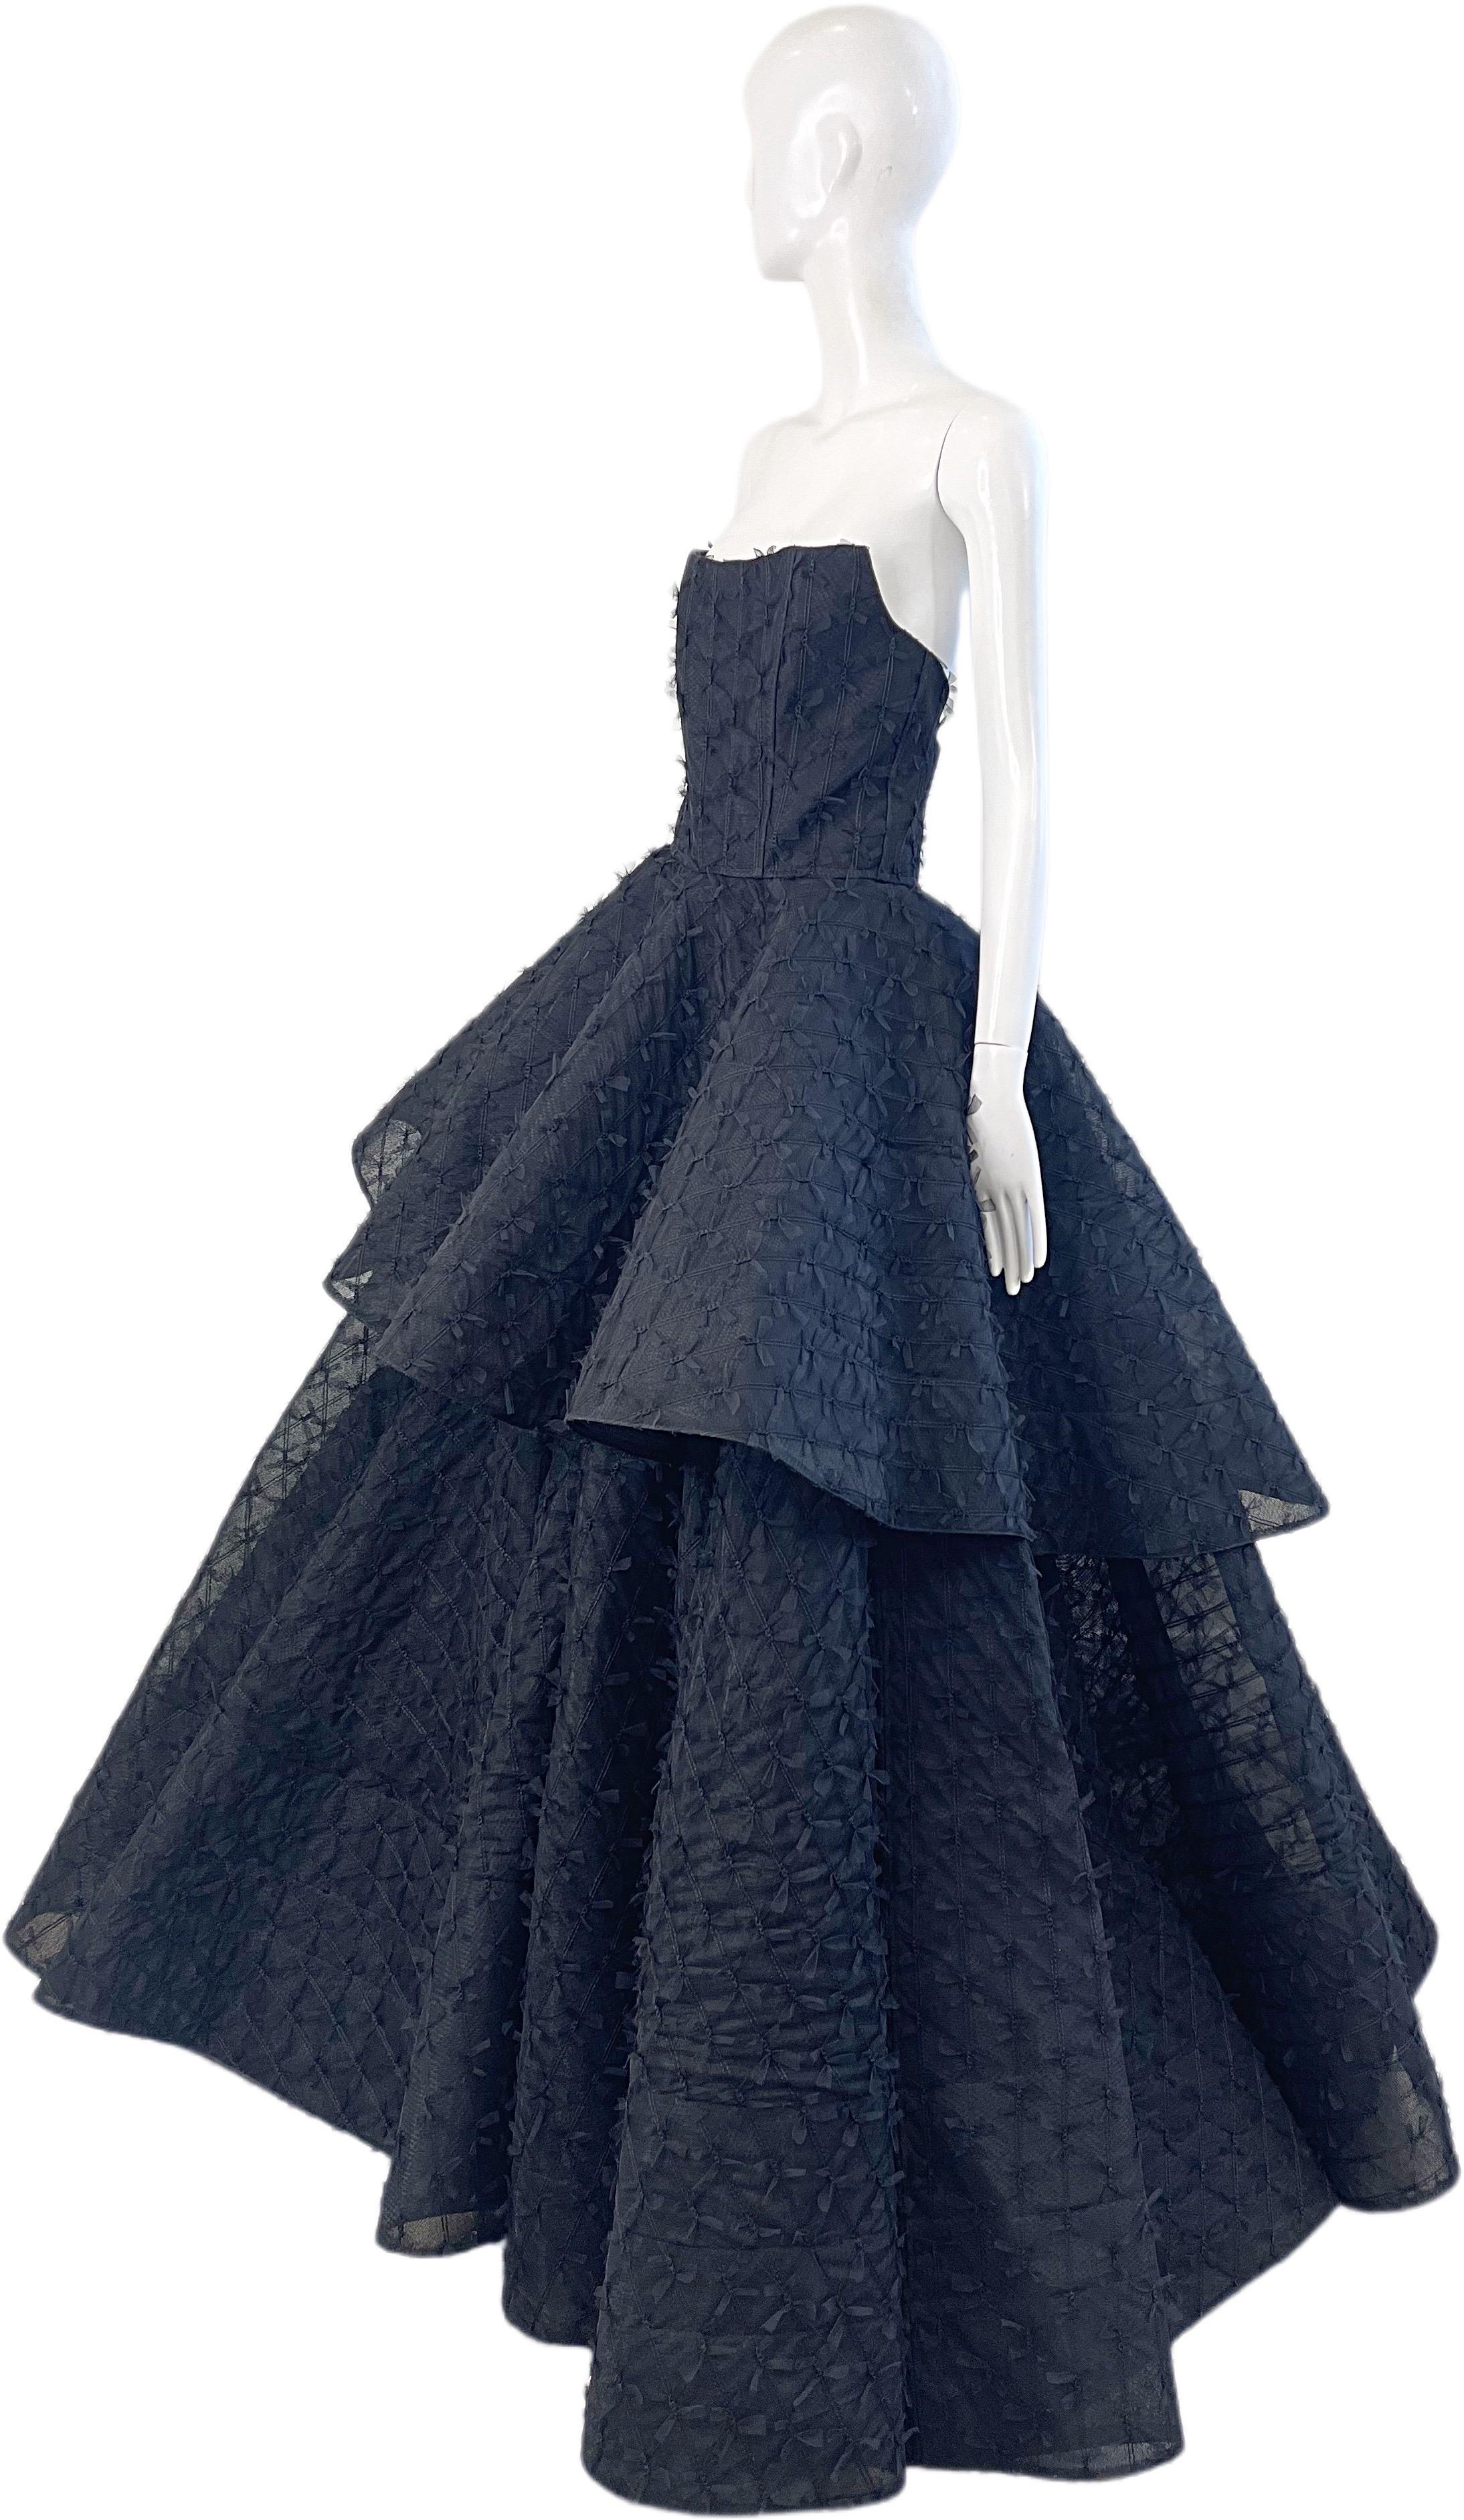 Christian Siriano Couture Spring 2019 Runway Size 4 / 6 Black Horsehair Gown For Sale 9